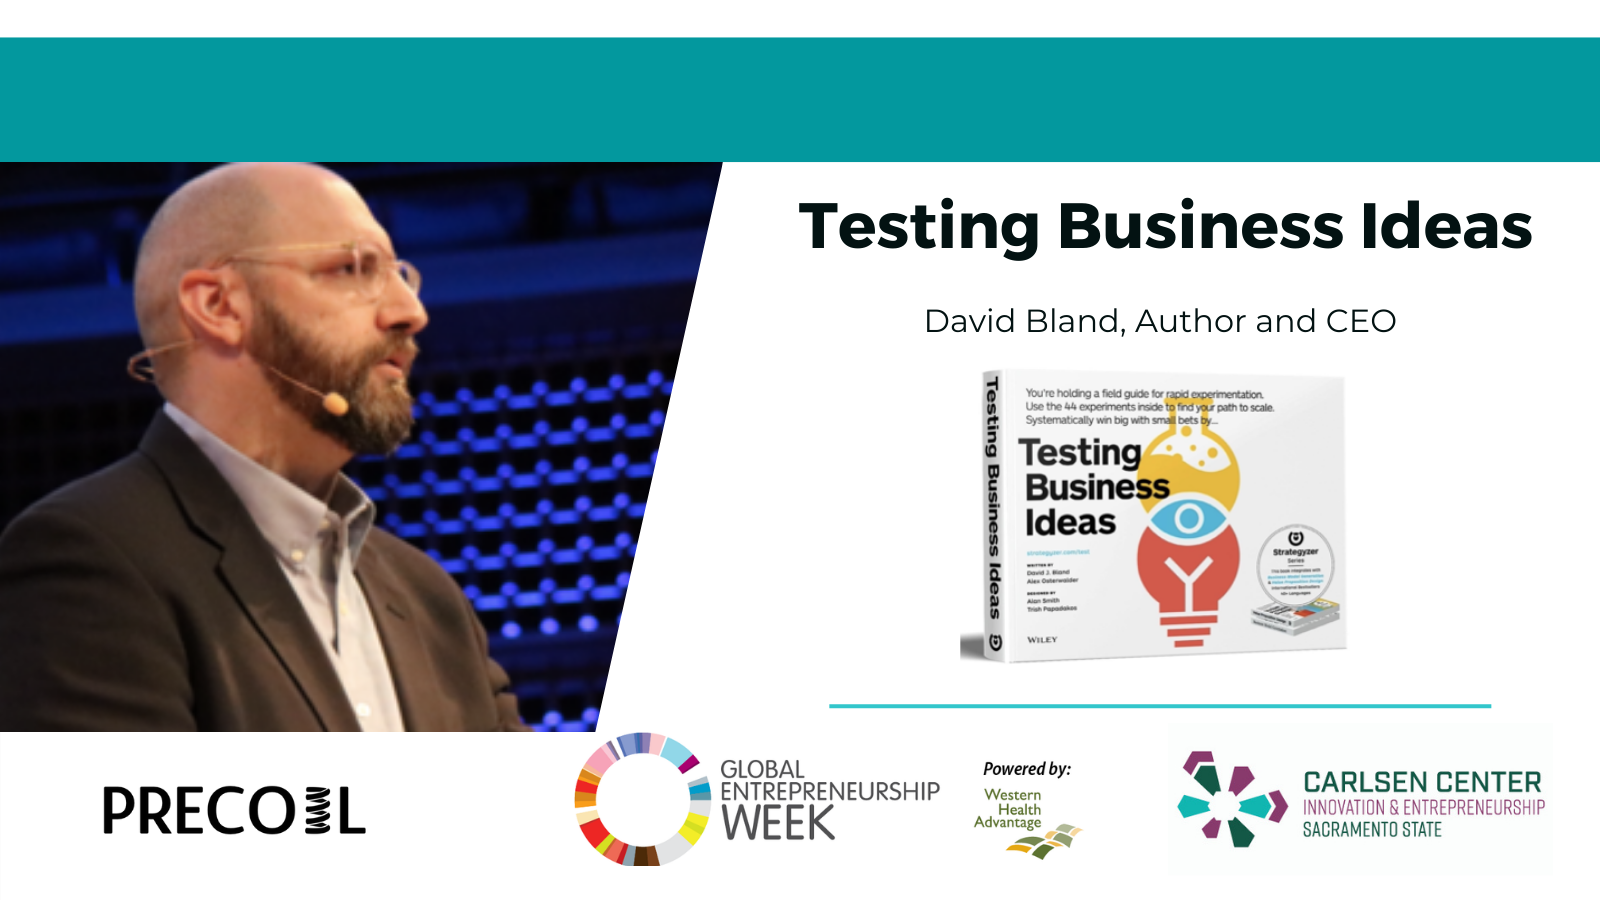 Testing Business Ideas with David Bland